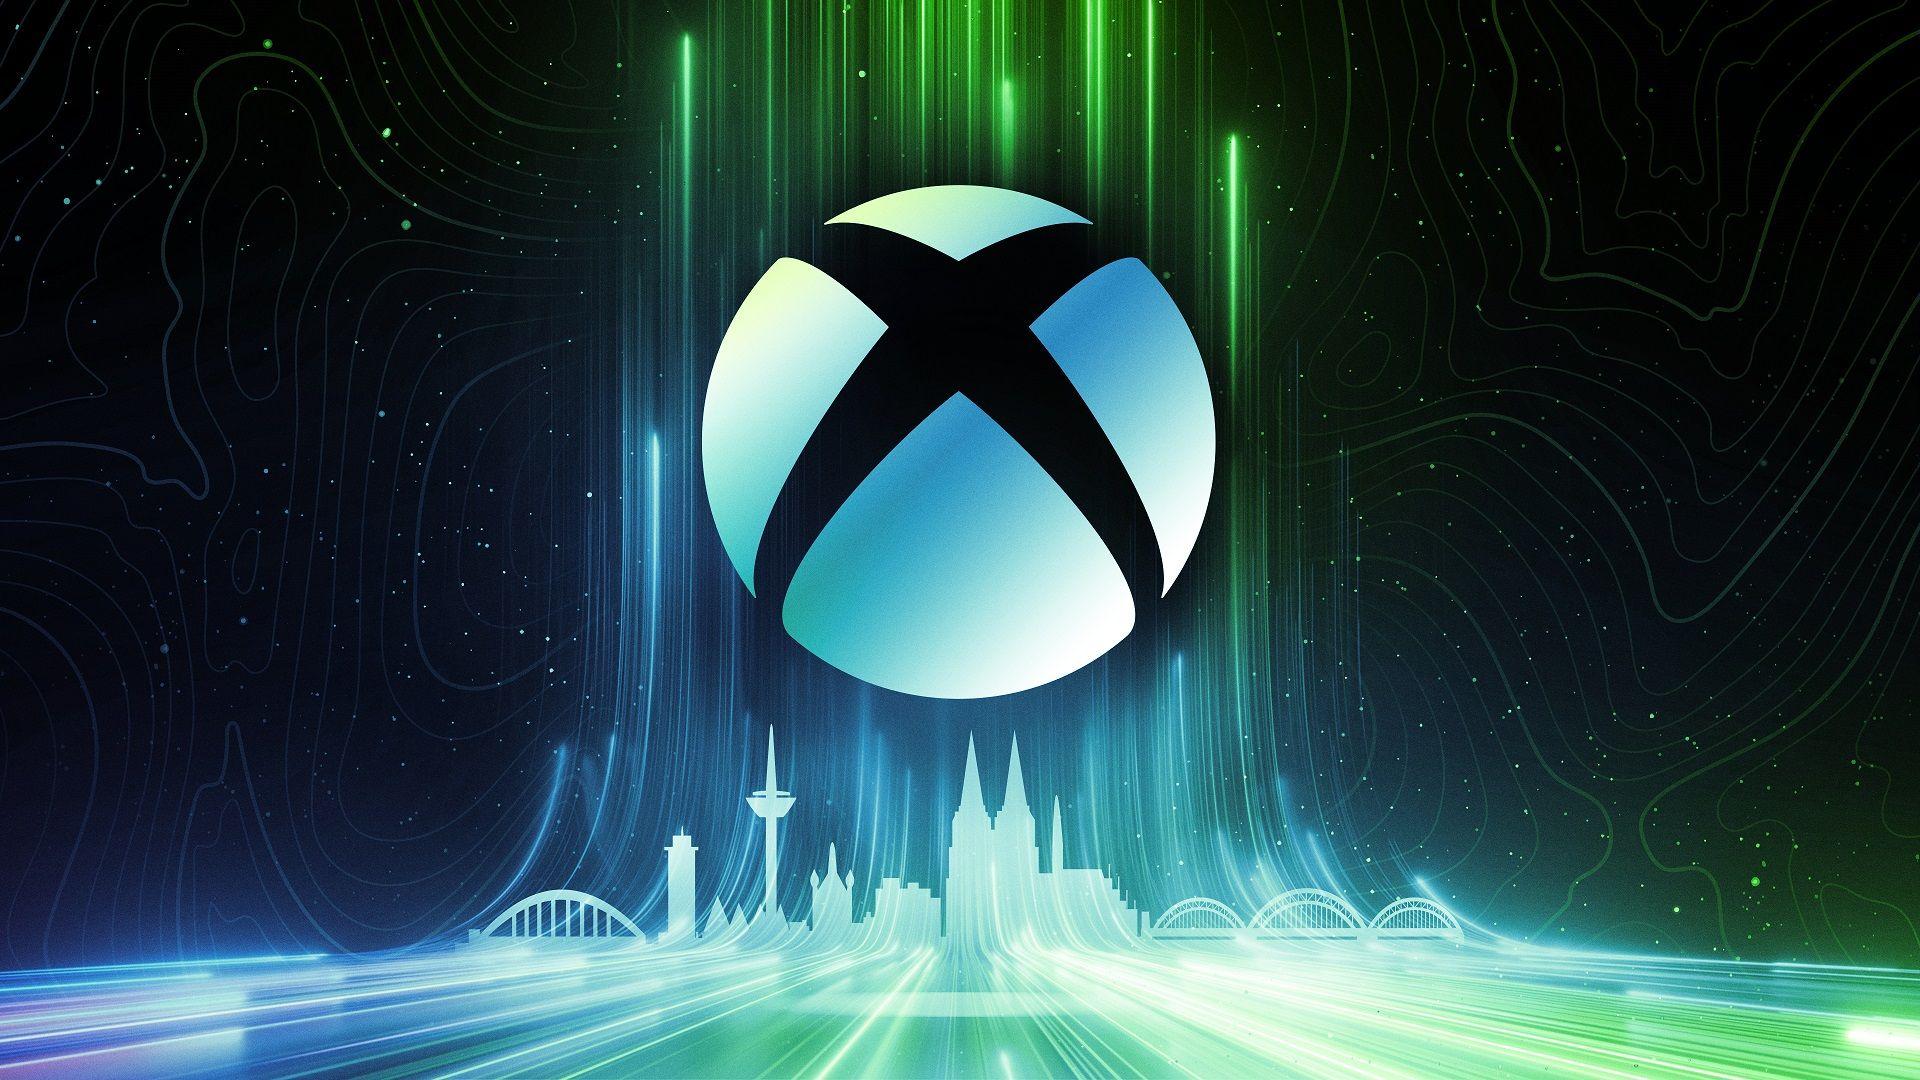 Xbox Handheld Console is an Xbox family device that may be announced very soon